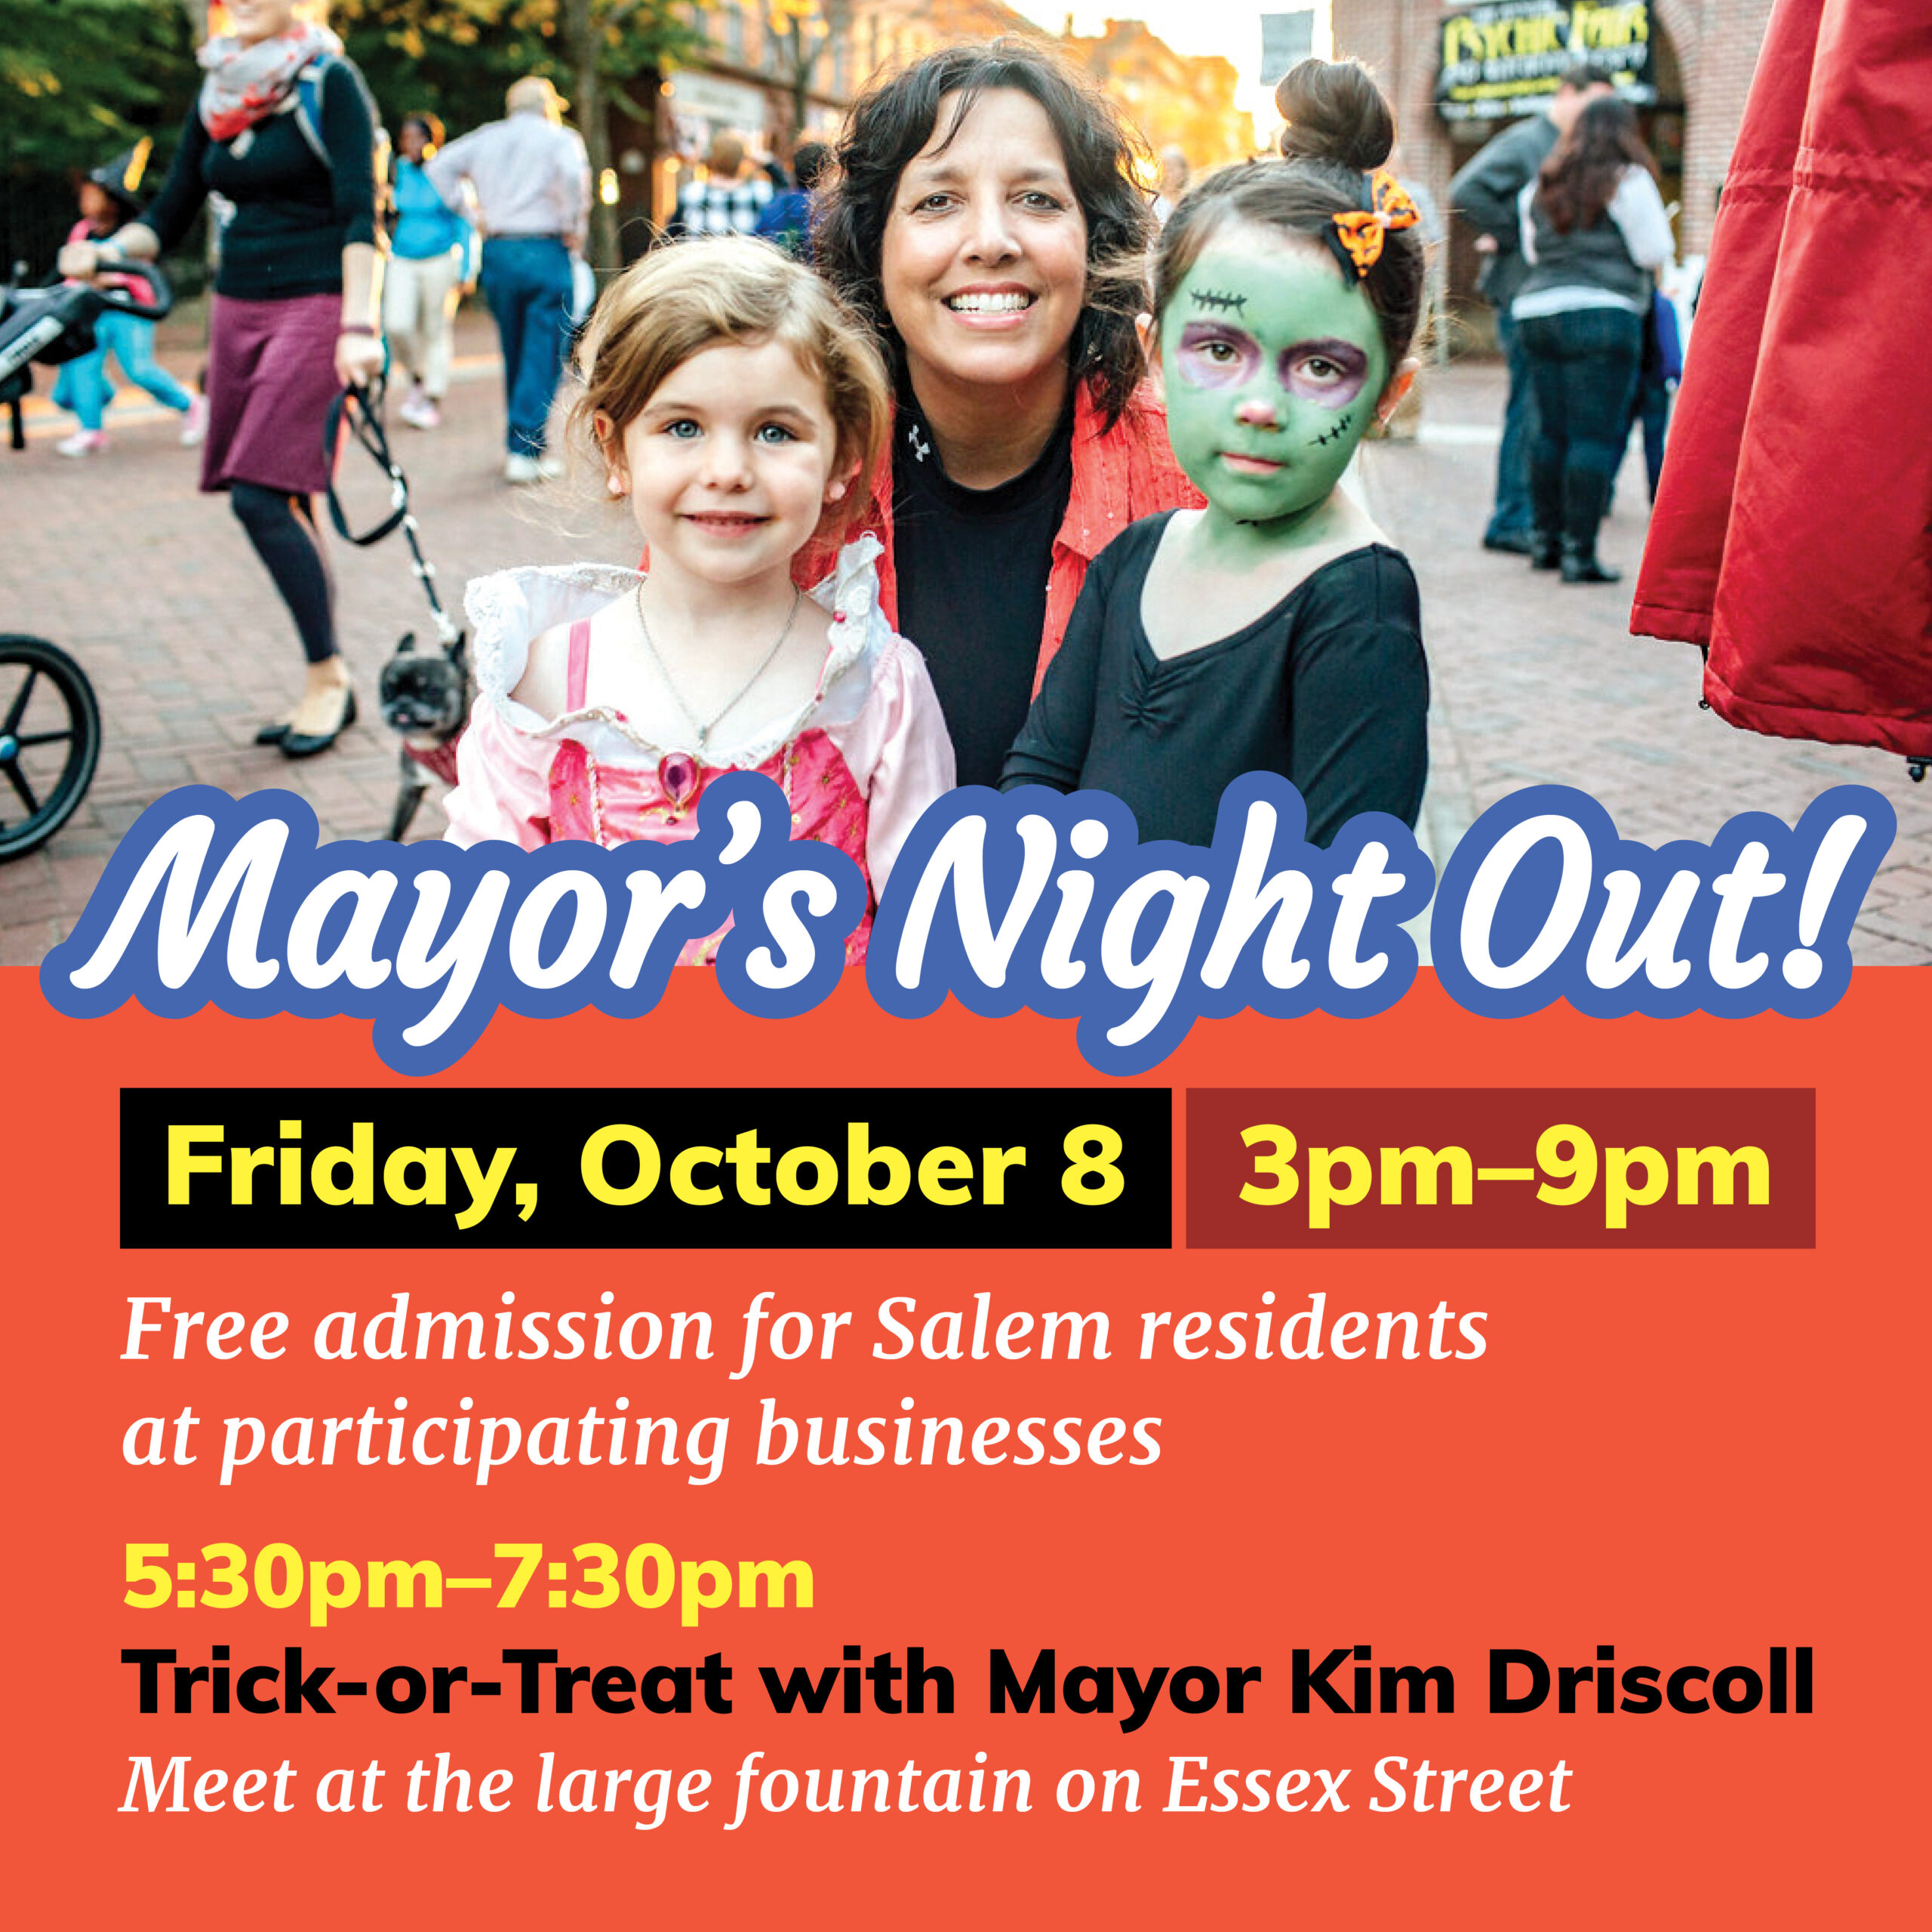 Salem:  Mayor’s Night Out Returns with Fun for the Whole Family